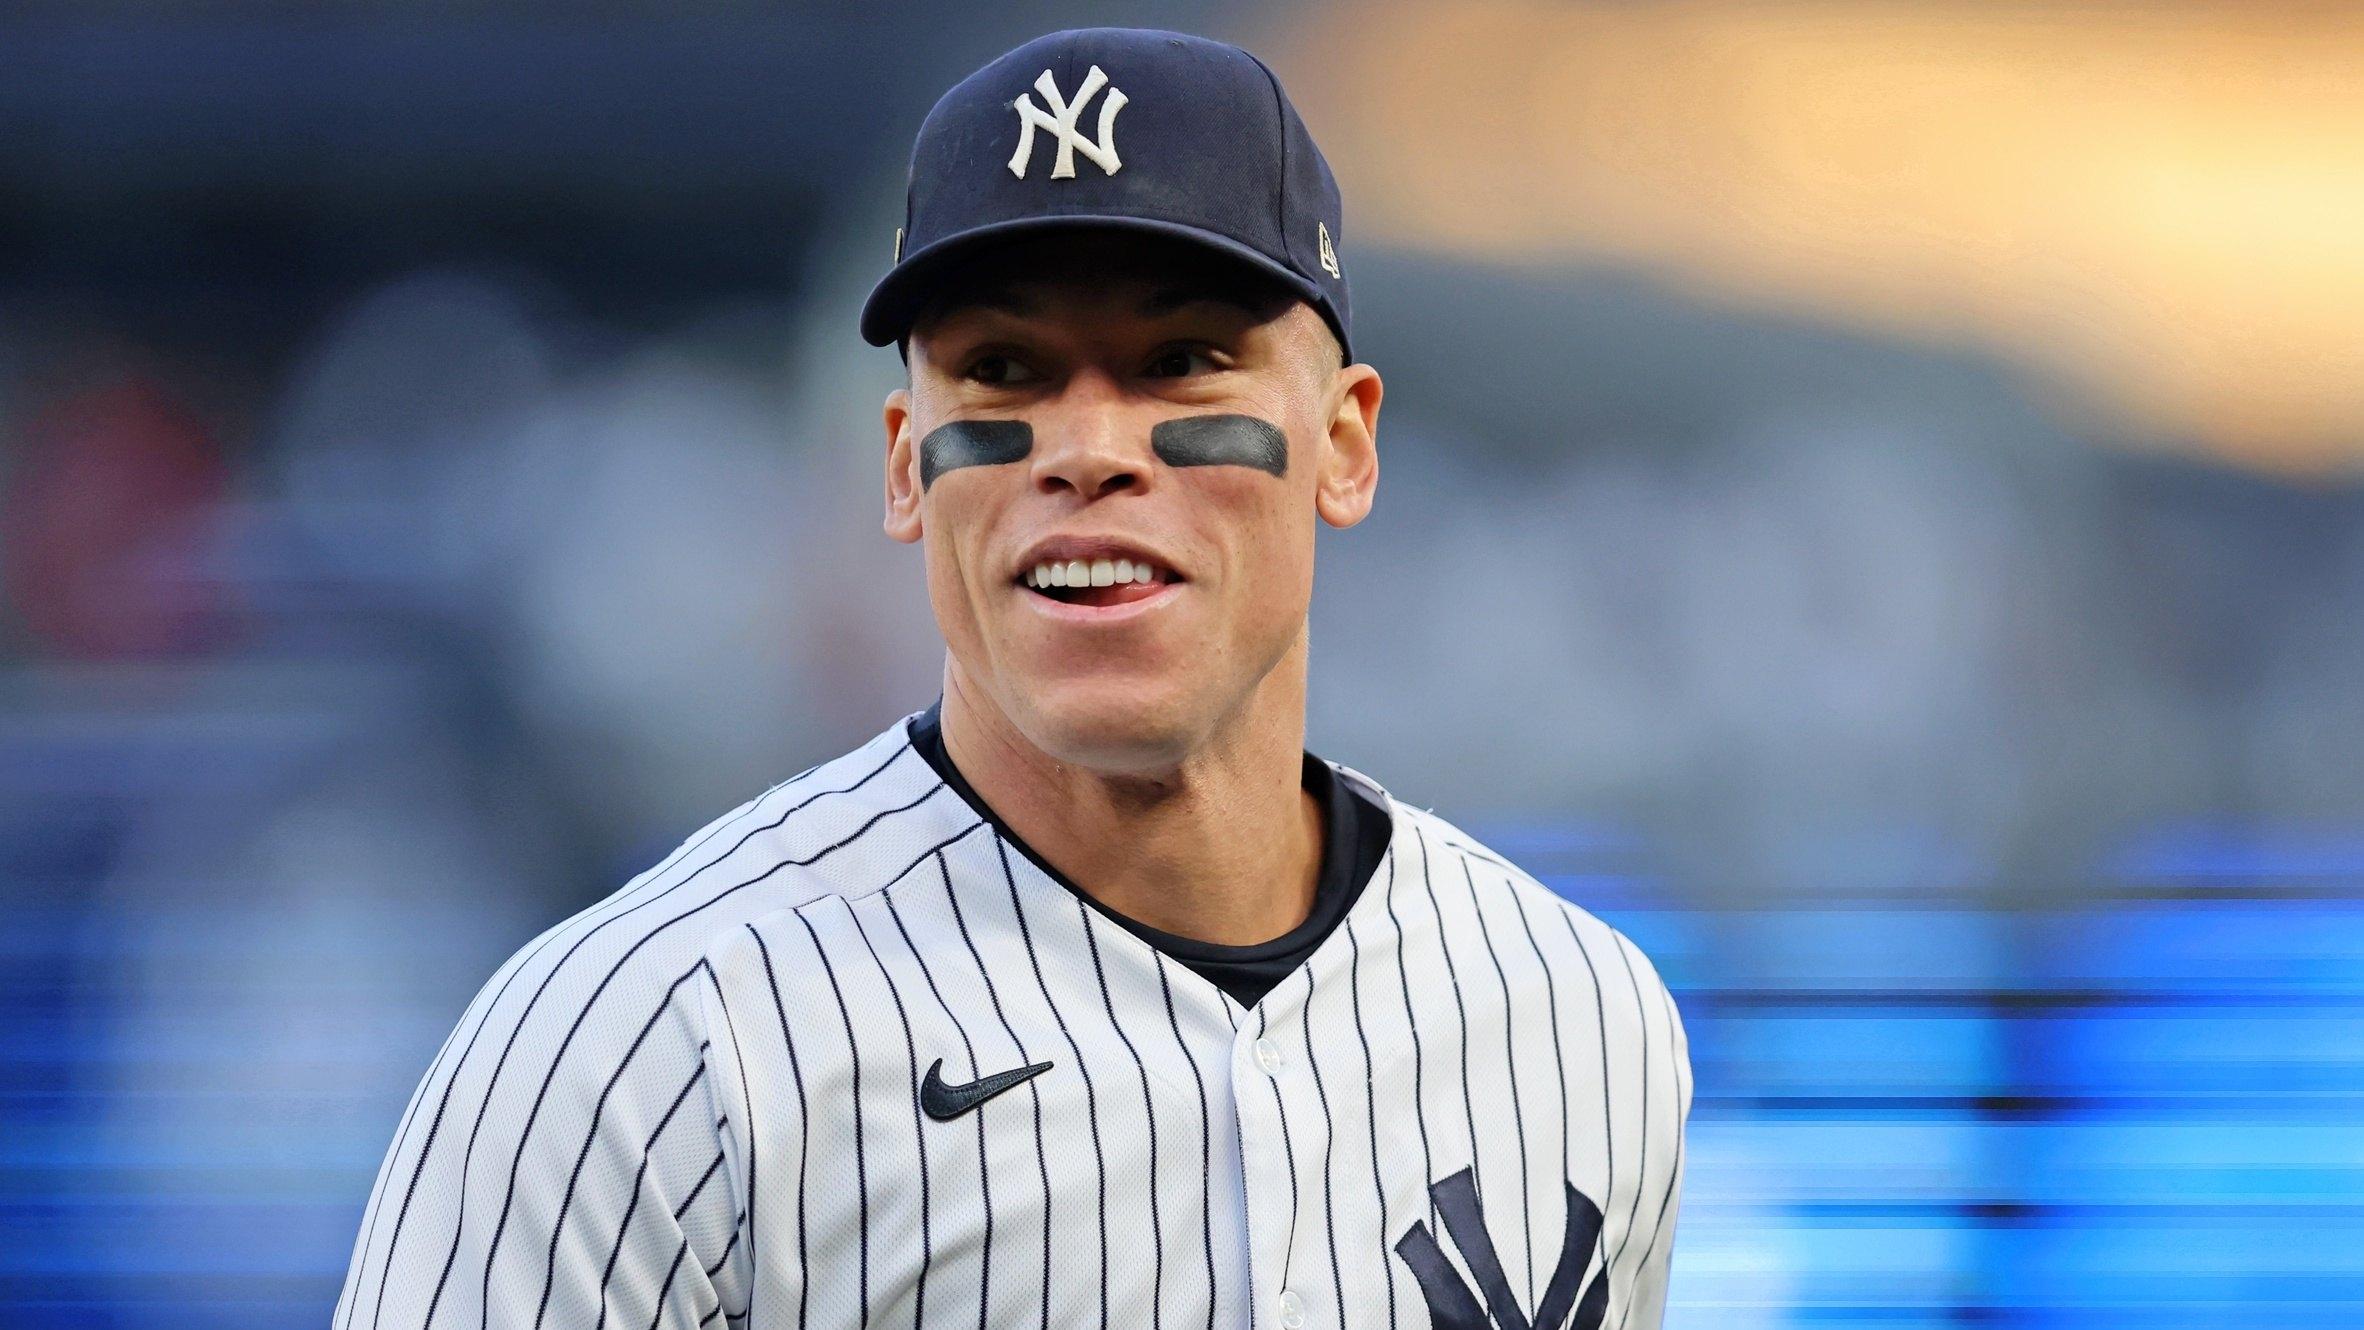 New York Yankees right fielder Aaron Judge. / Brad Penner-USA TODAY Sports